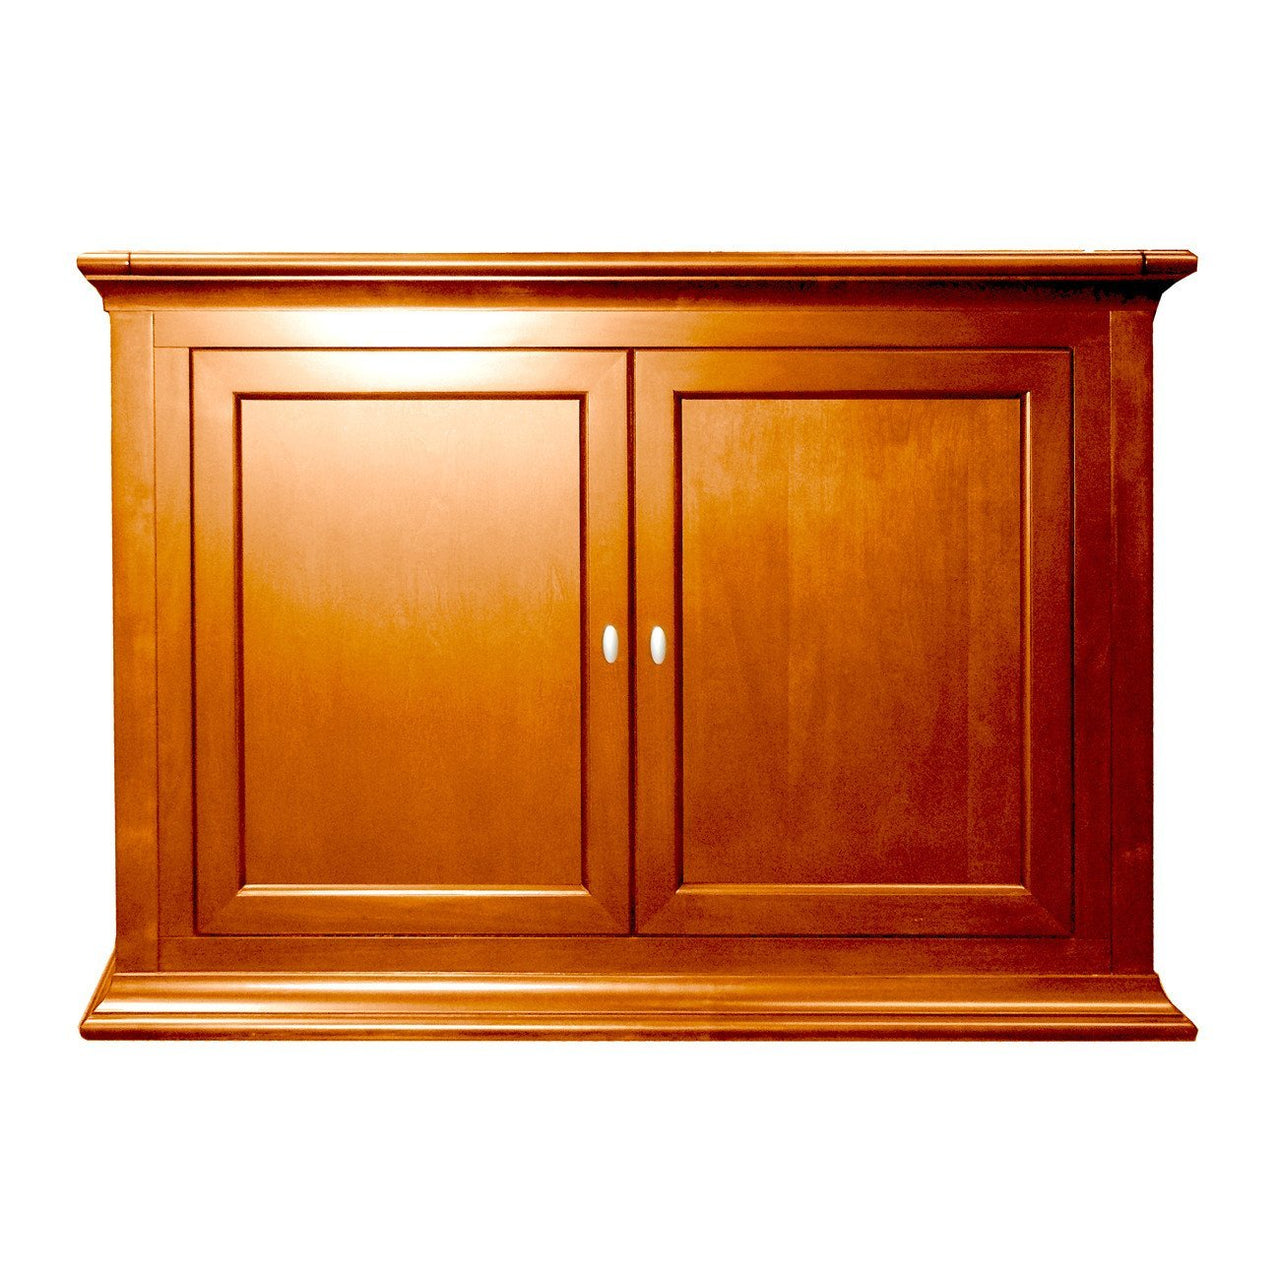 Touchstone Highland Tv Lift Cabinets For Up To 46” Flat Screen Tv’S Tv Lift Cabinets Touchstone 